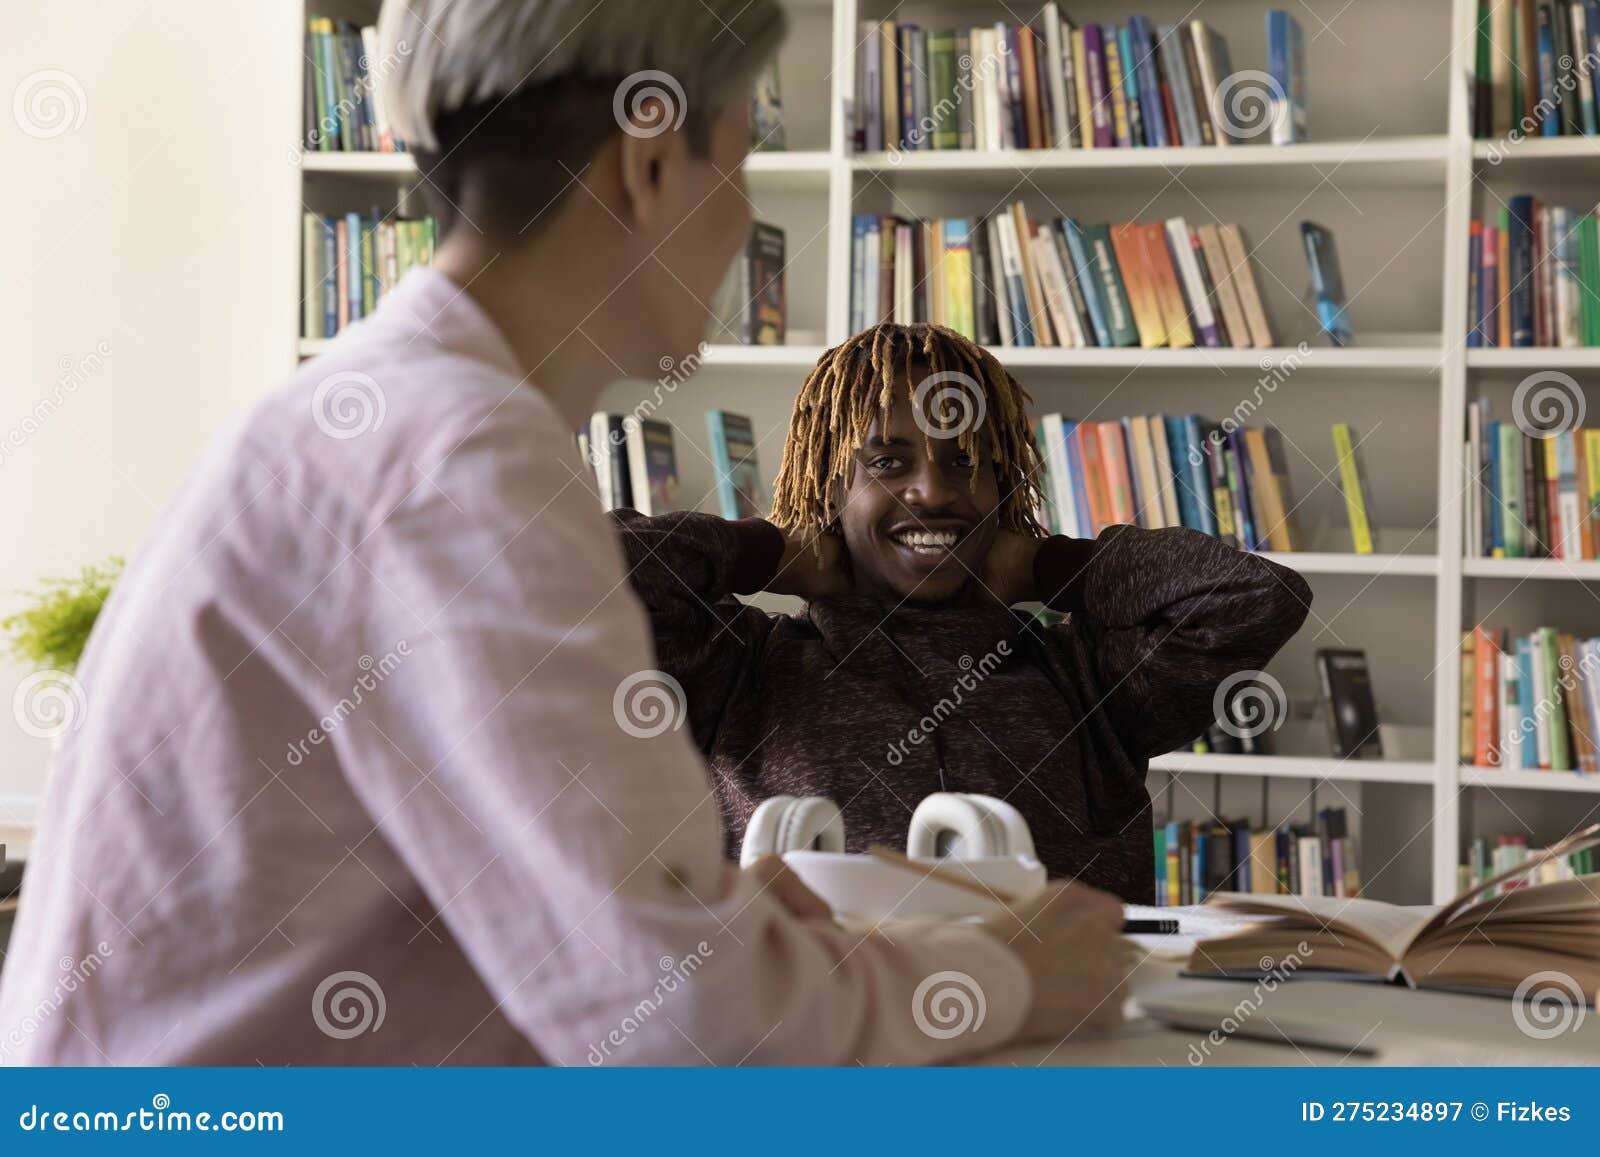 asian and african groupmates blab during break in college library